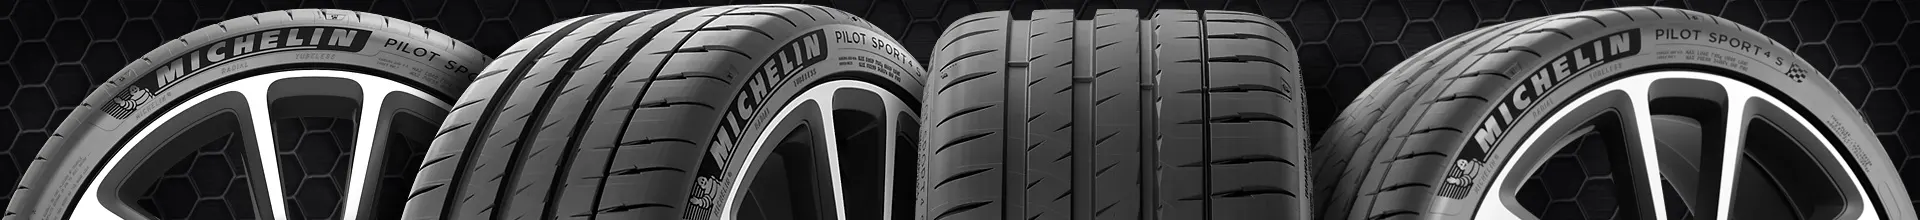 255 55 17 discount tires from Online Wheels Direct